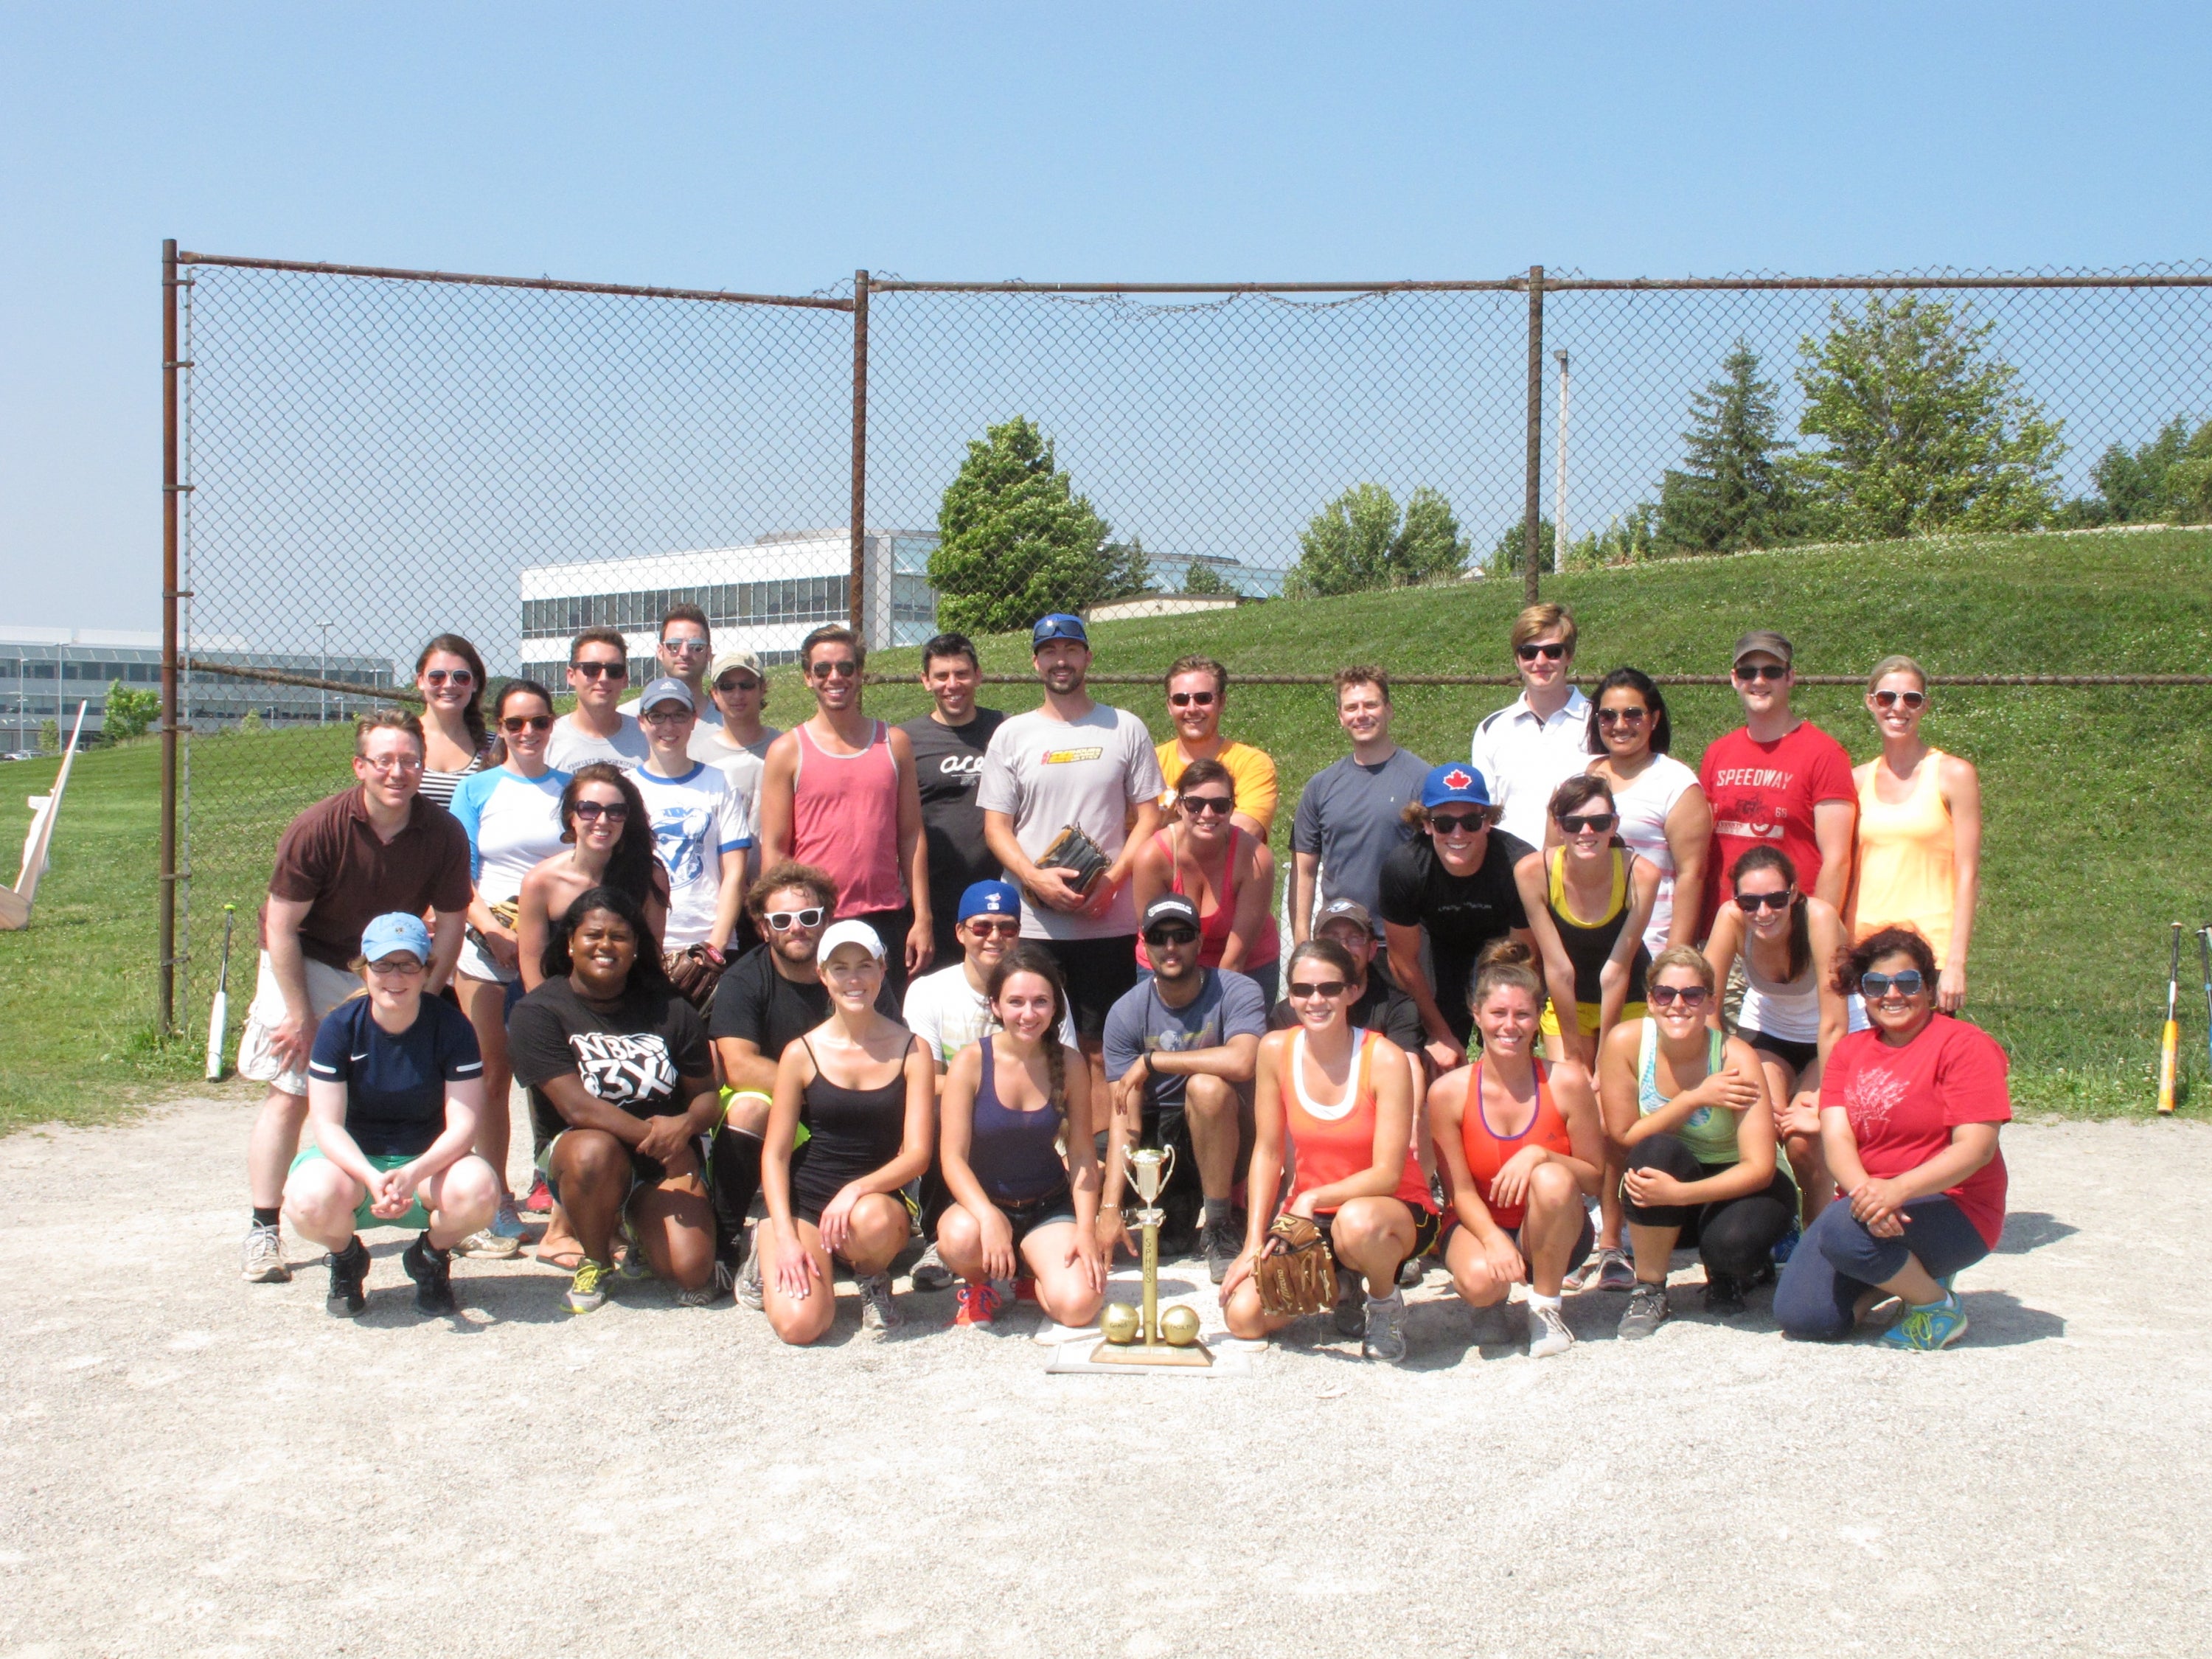 Group picture from 2014 Softball Game